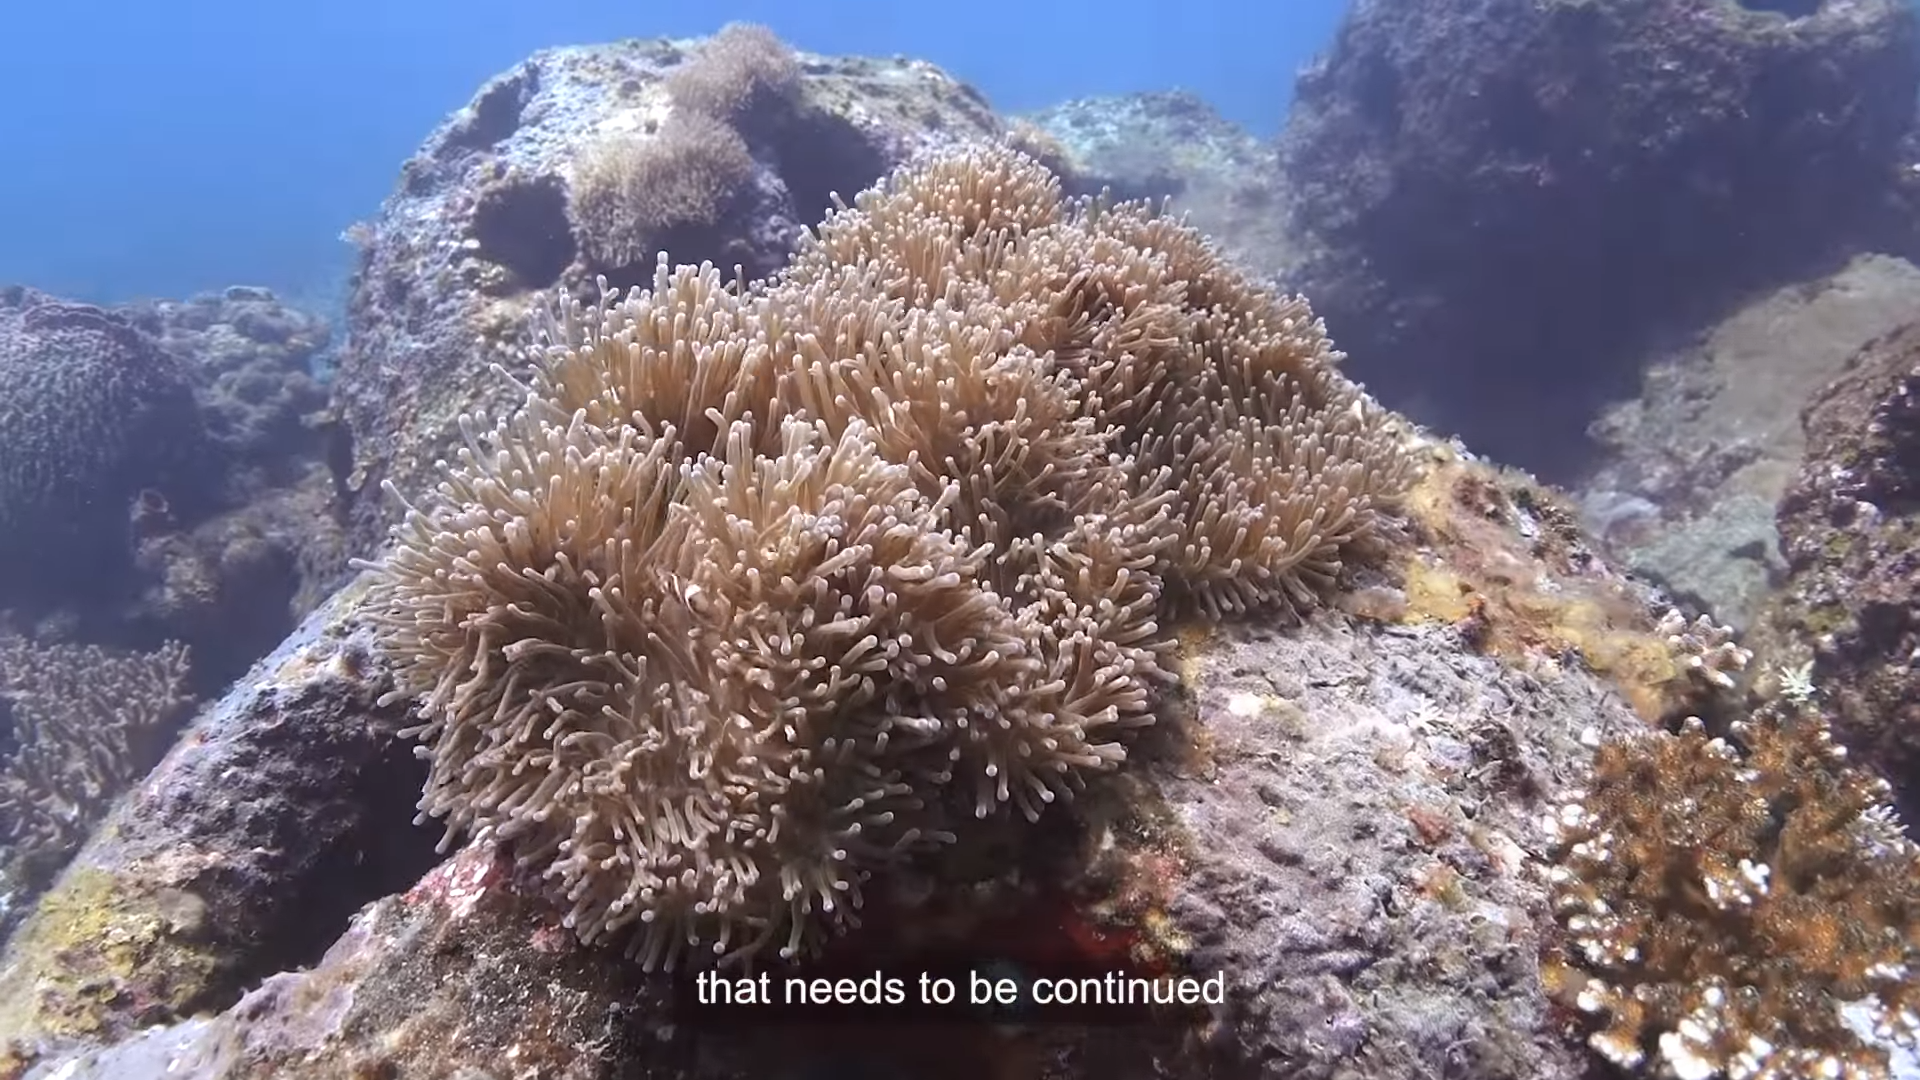 Image extracted from the recent video documenting the diving expedition to measure the progress of the BEACON project’s first batch of reef balls, deployed in 2015.